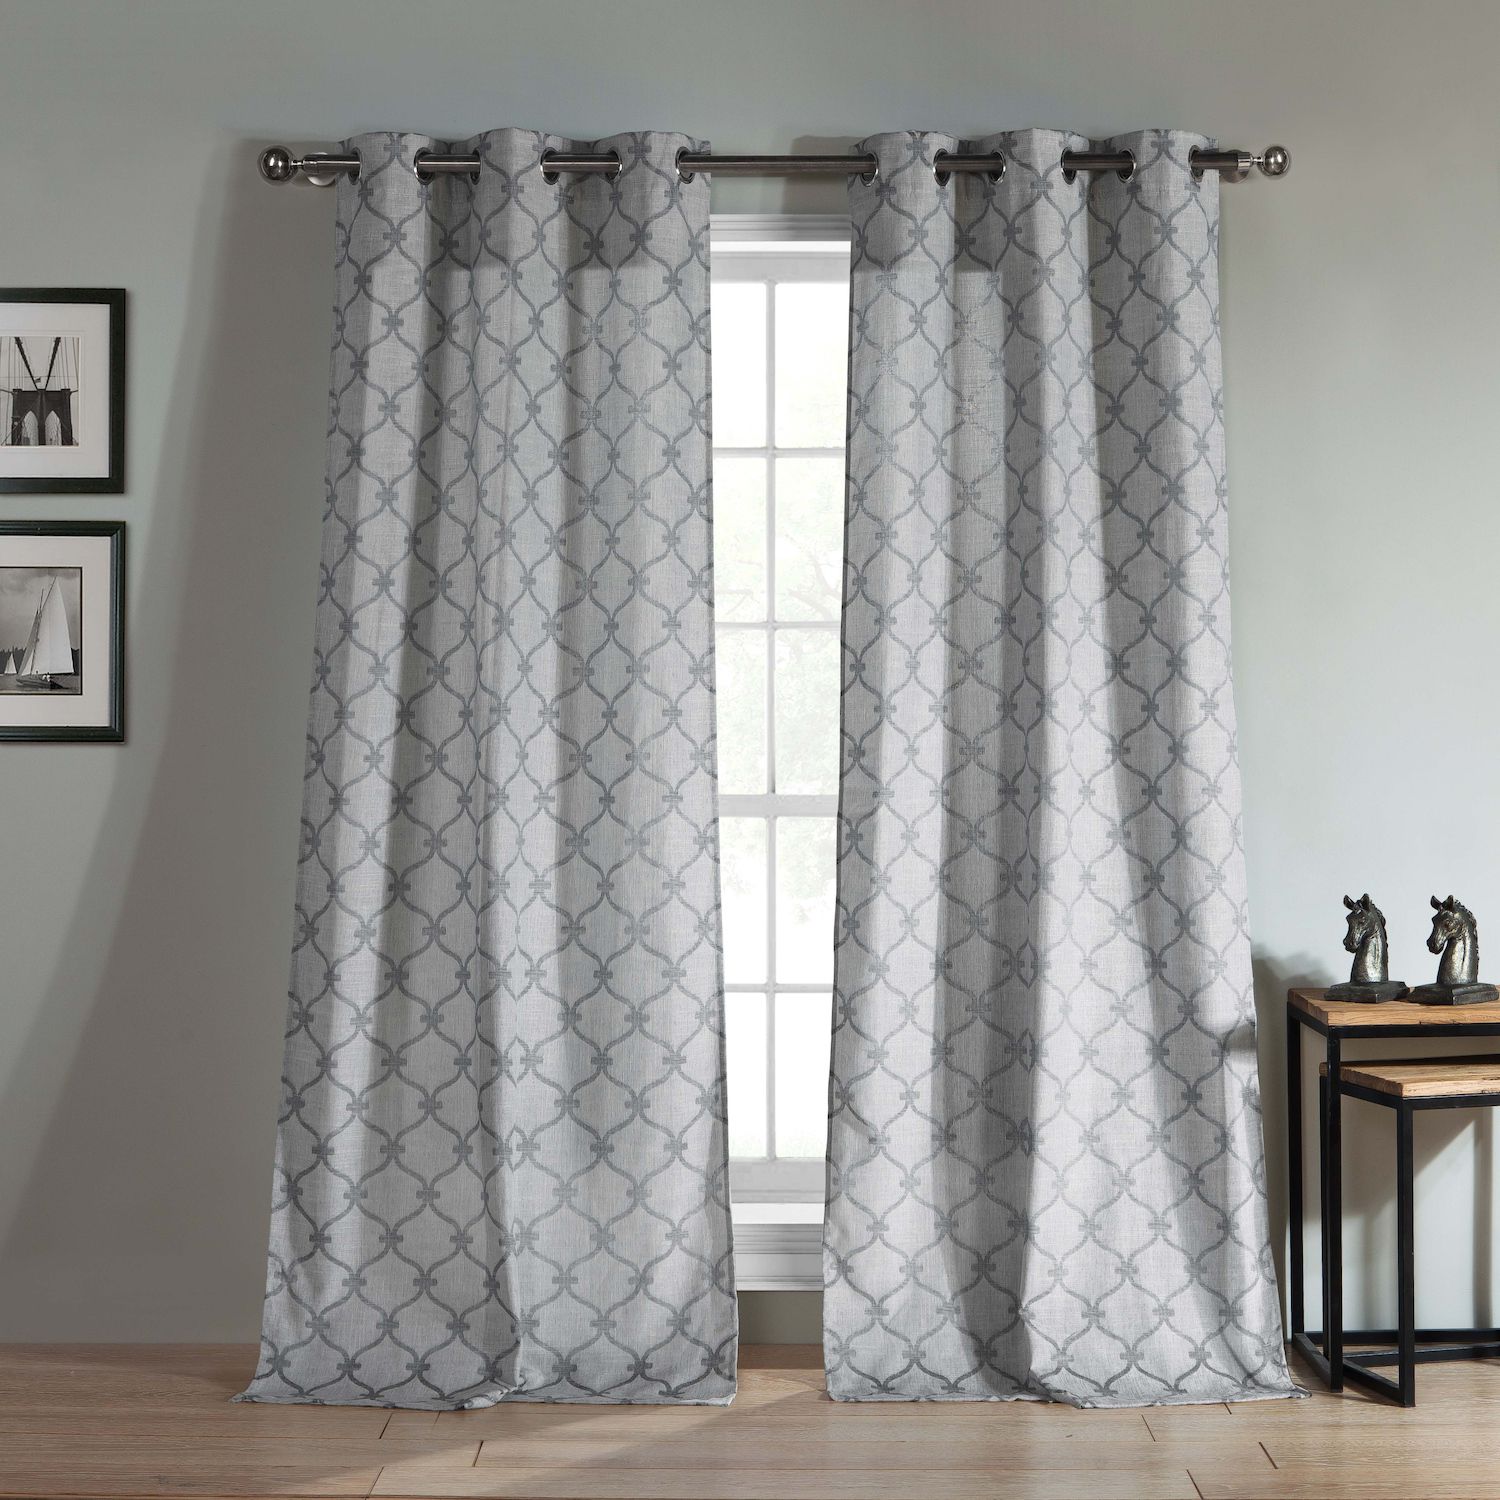 Image for Duck River Textile Kenilworth Gate 2-pack Window Curtain Set at Kohl's.